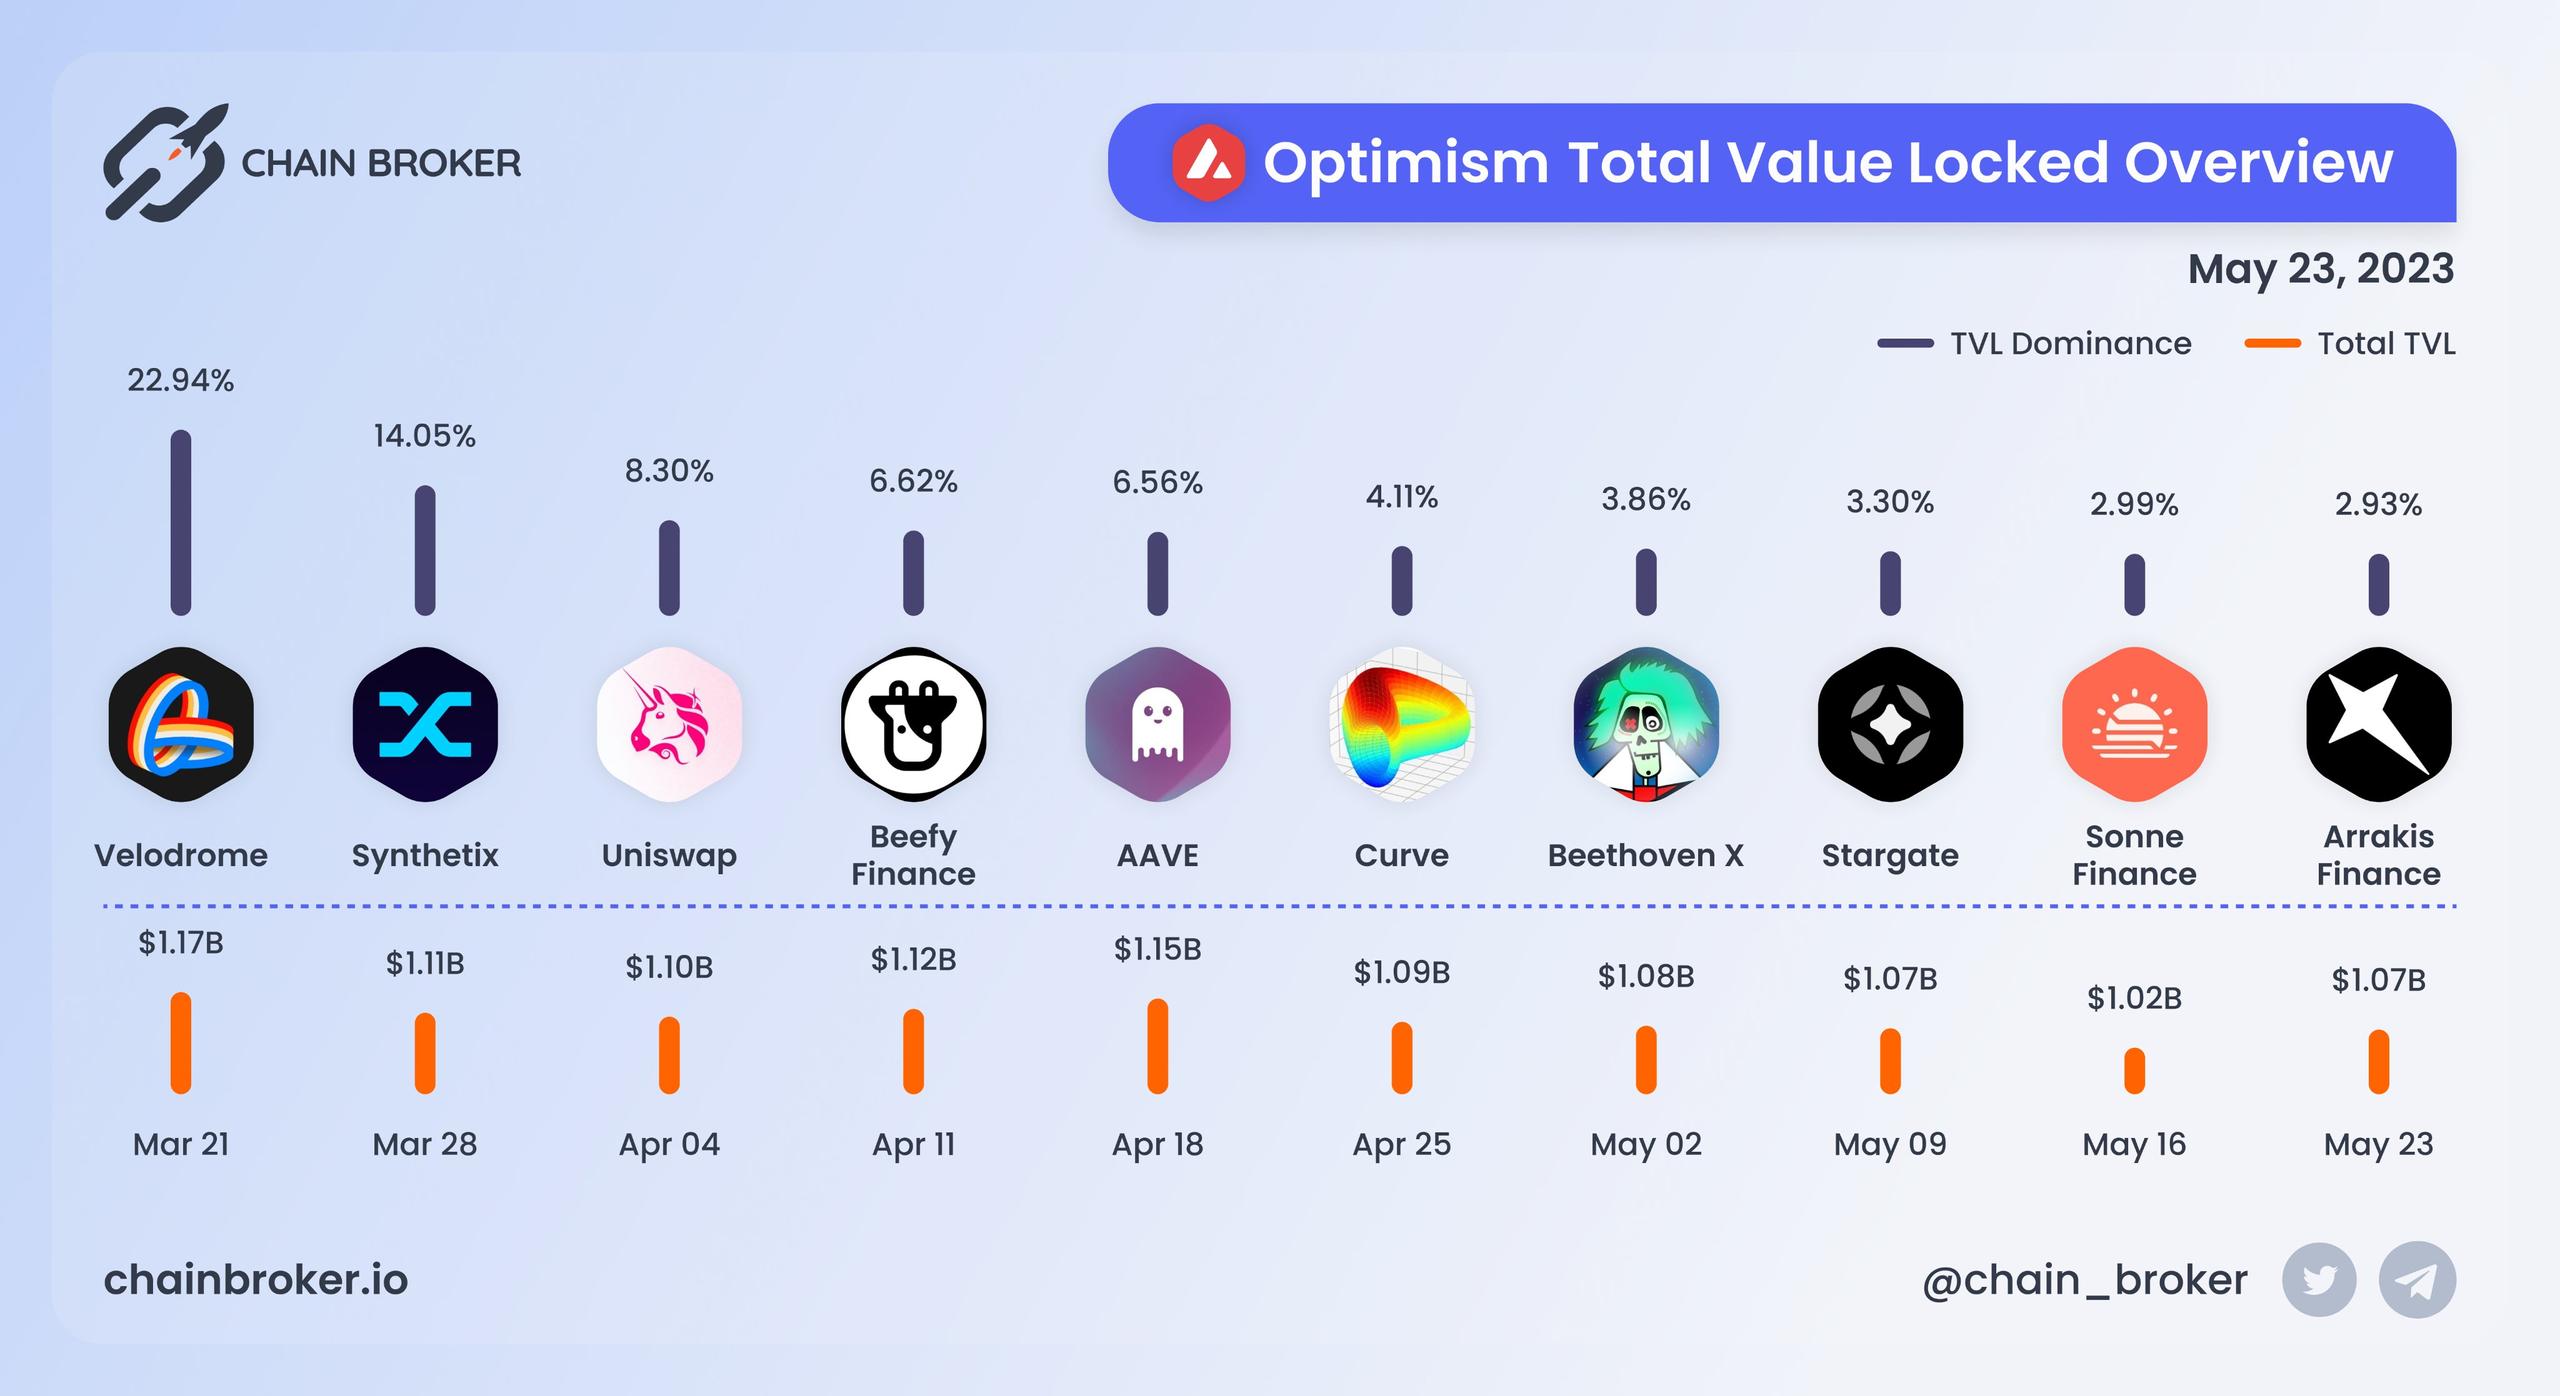 Optimism total value locked overview